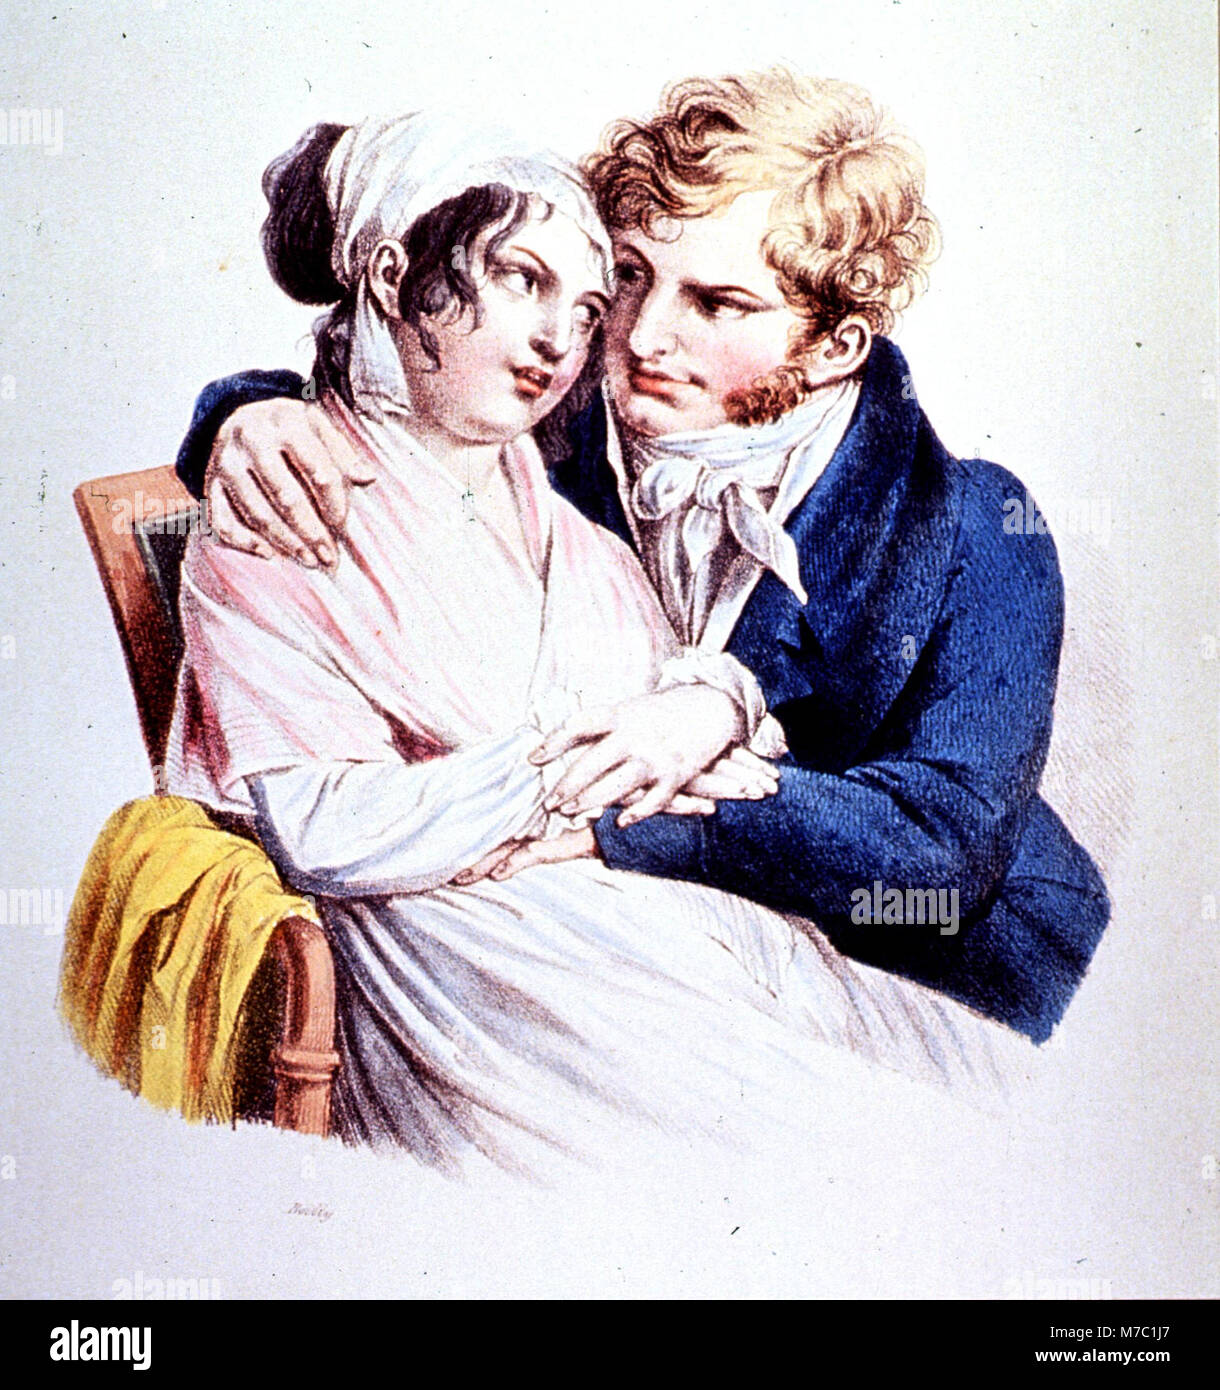 Author(s)- Boilly, Louis Léopold, 1761-1845, artist (40156398981) Stock Photo